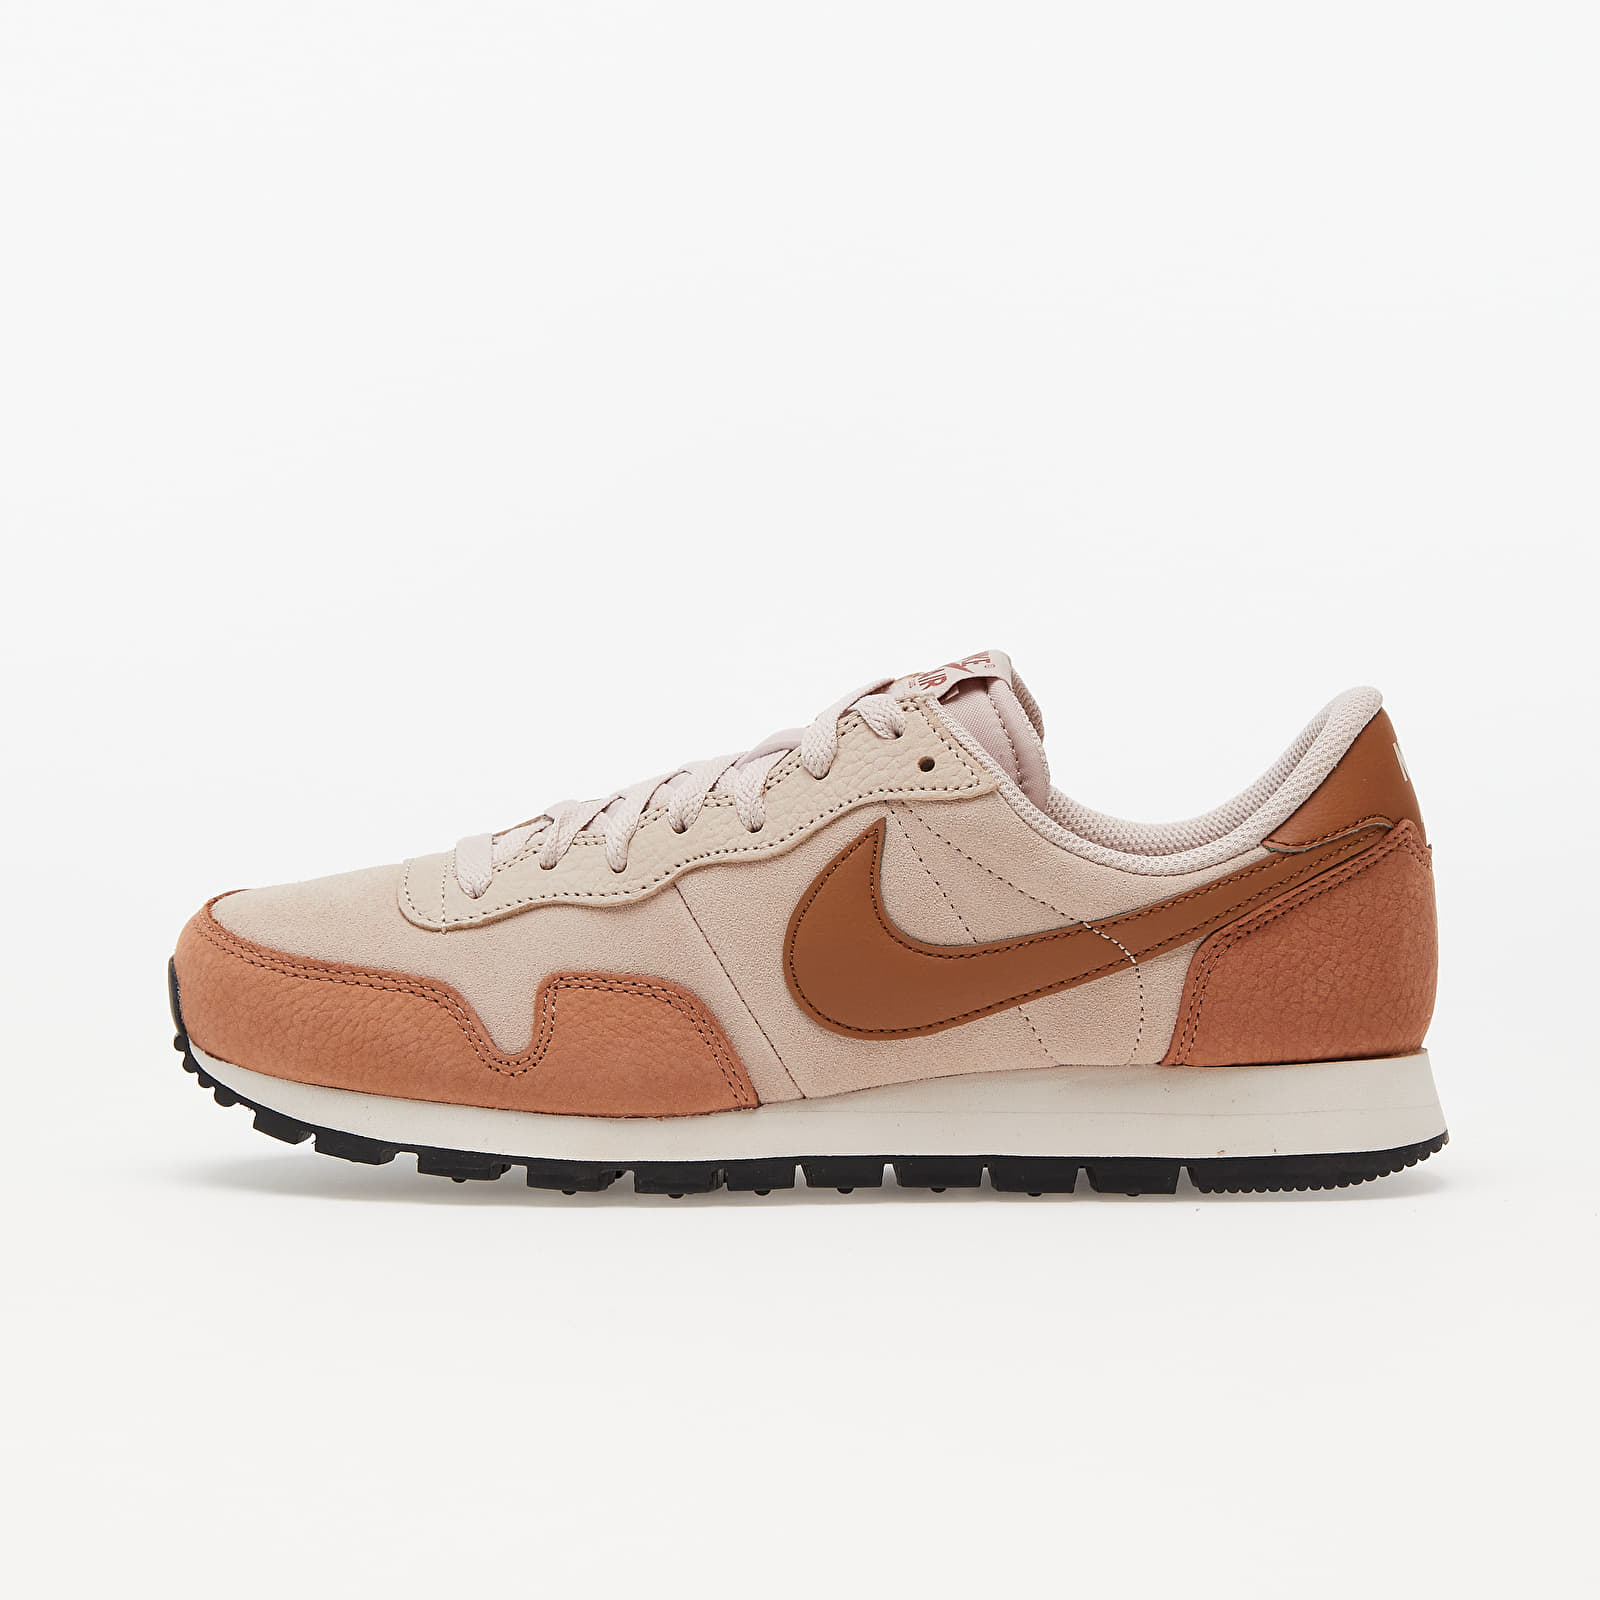 Chaussures et baskets homme Nike Air Pegasus 83 Premium Fossil Stone/ Canyon Rust-Fossil Rose